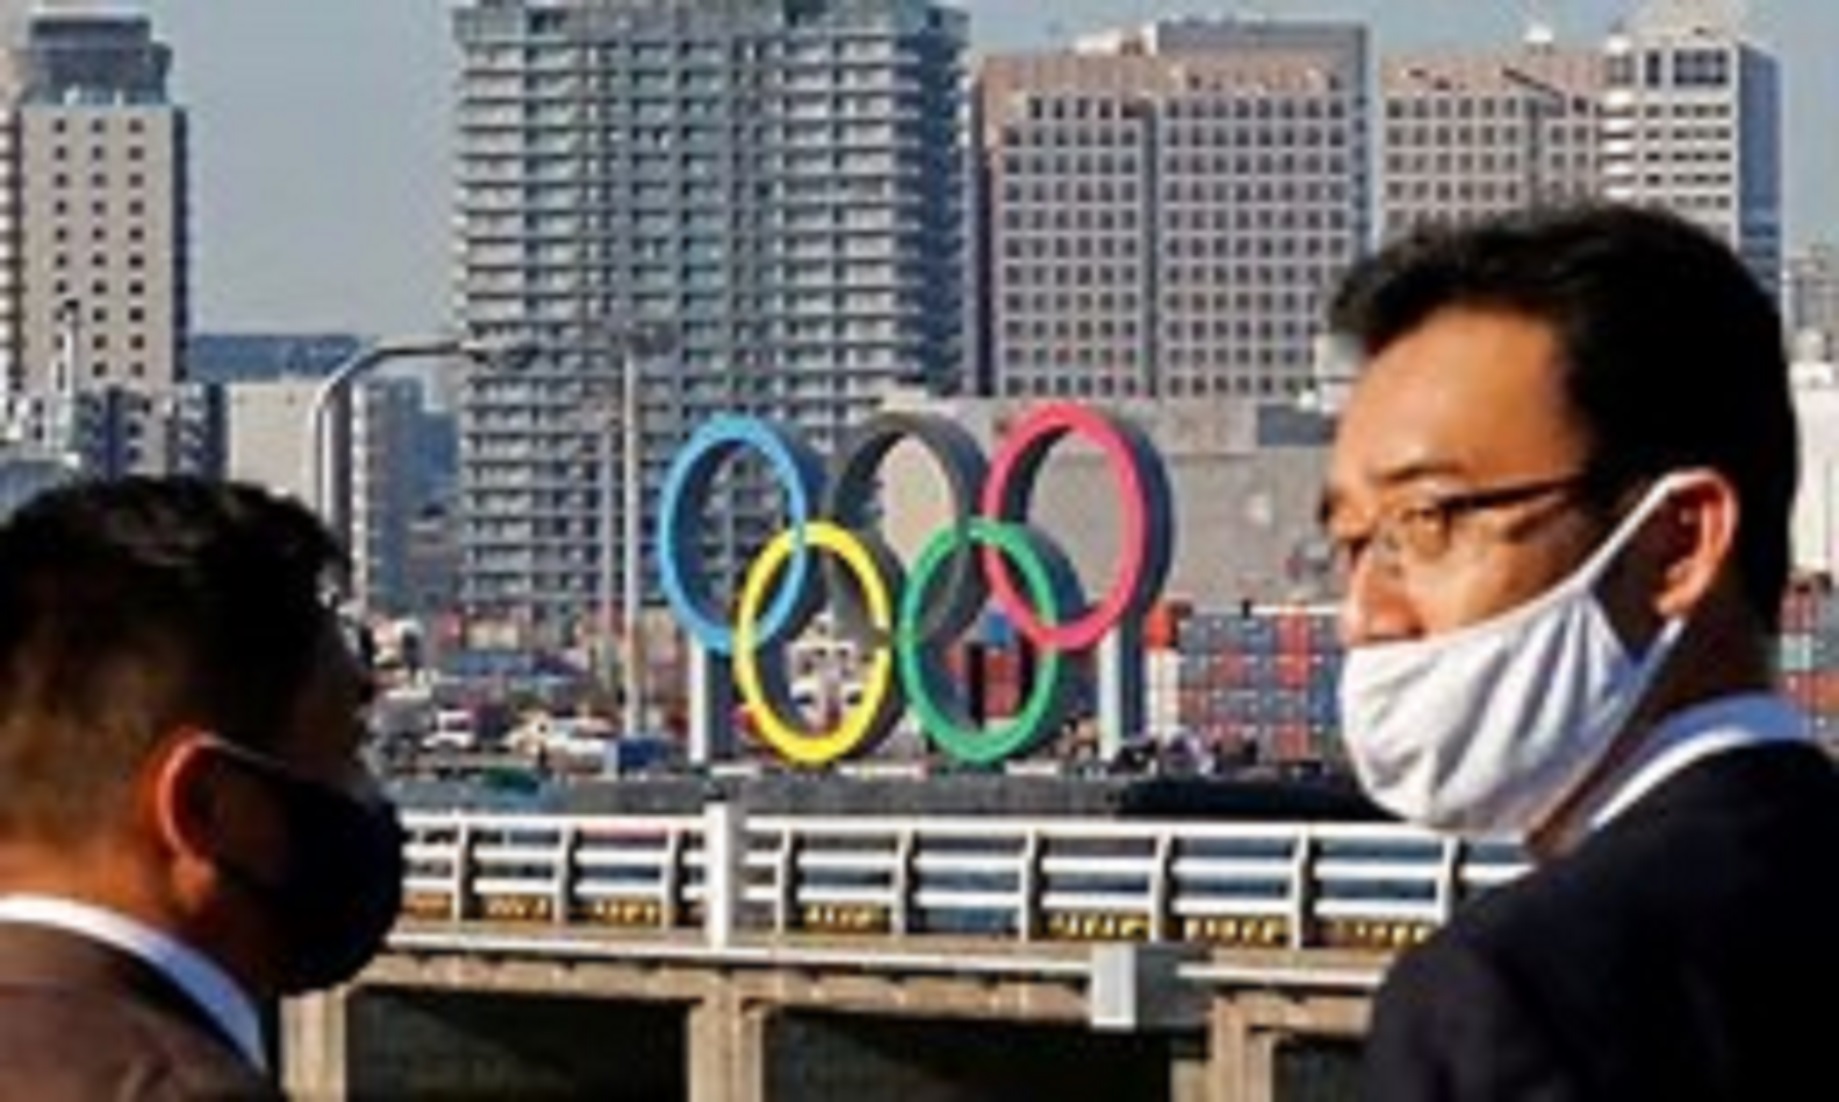 Additional Costs Could Add Up To 2.8 Billion Dollars To Tokyo 2020